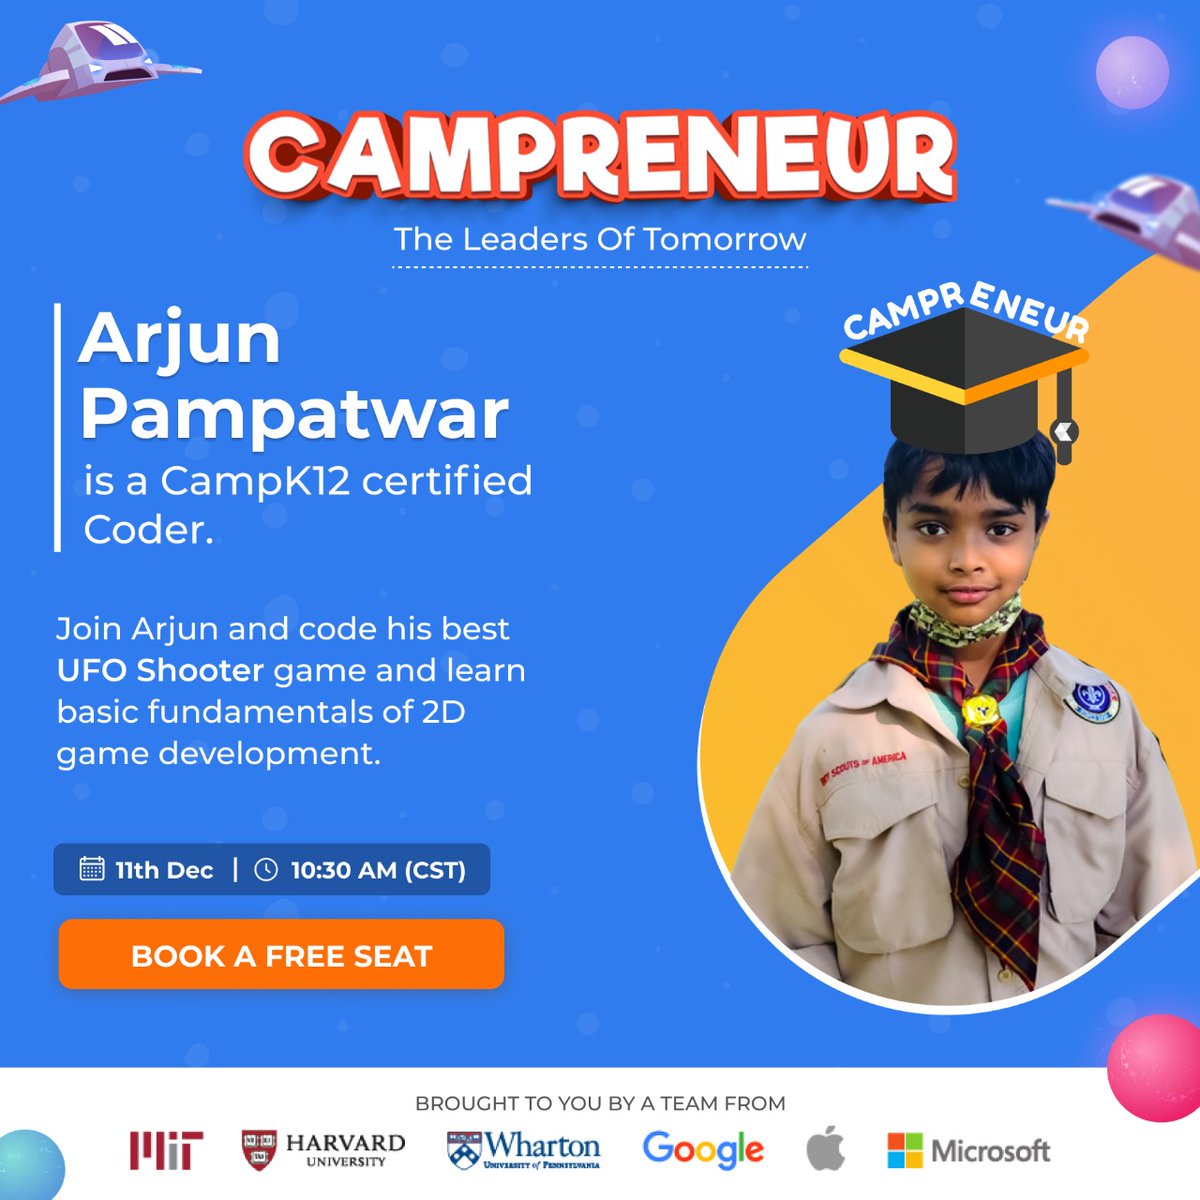 our star performer, Arjun Pampatwar is a 5th Grader who loves to code and is a certified app developer from Camp K12. Join Arjun for a FREE masterclass on the fundamentals of 2D game development & recreates one of his exceptional projects. Register here: bit.ly/3FvkxY8